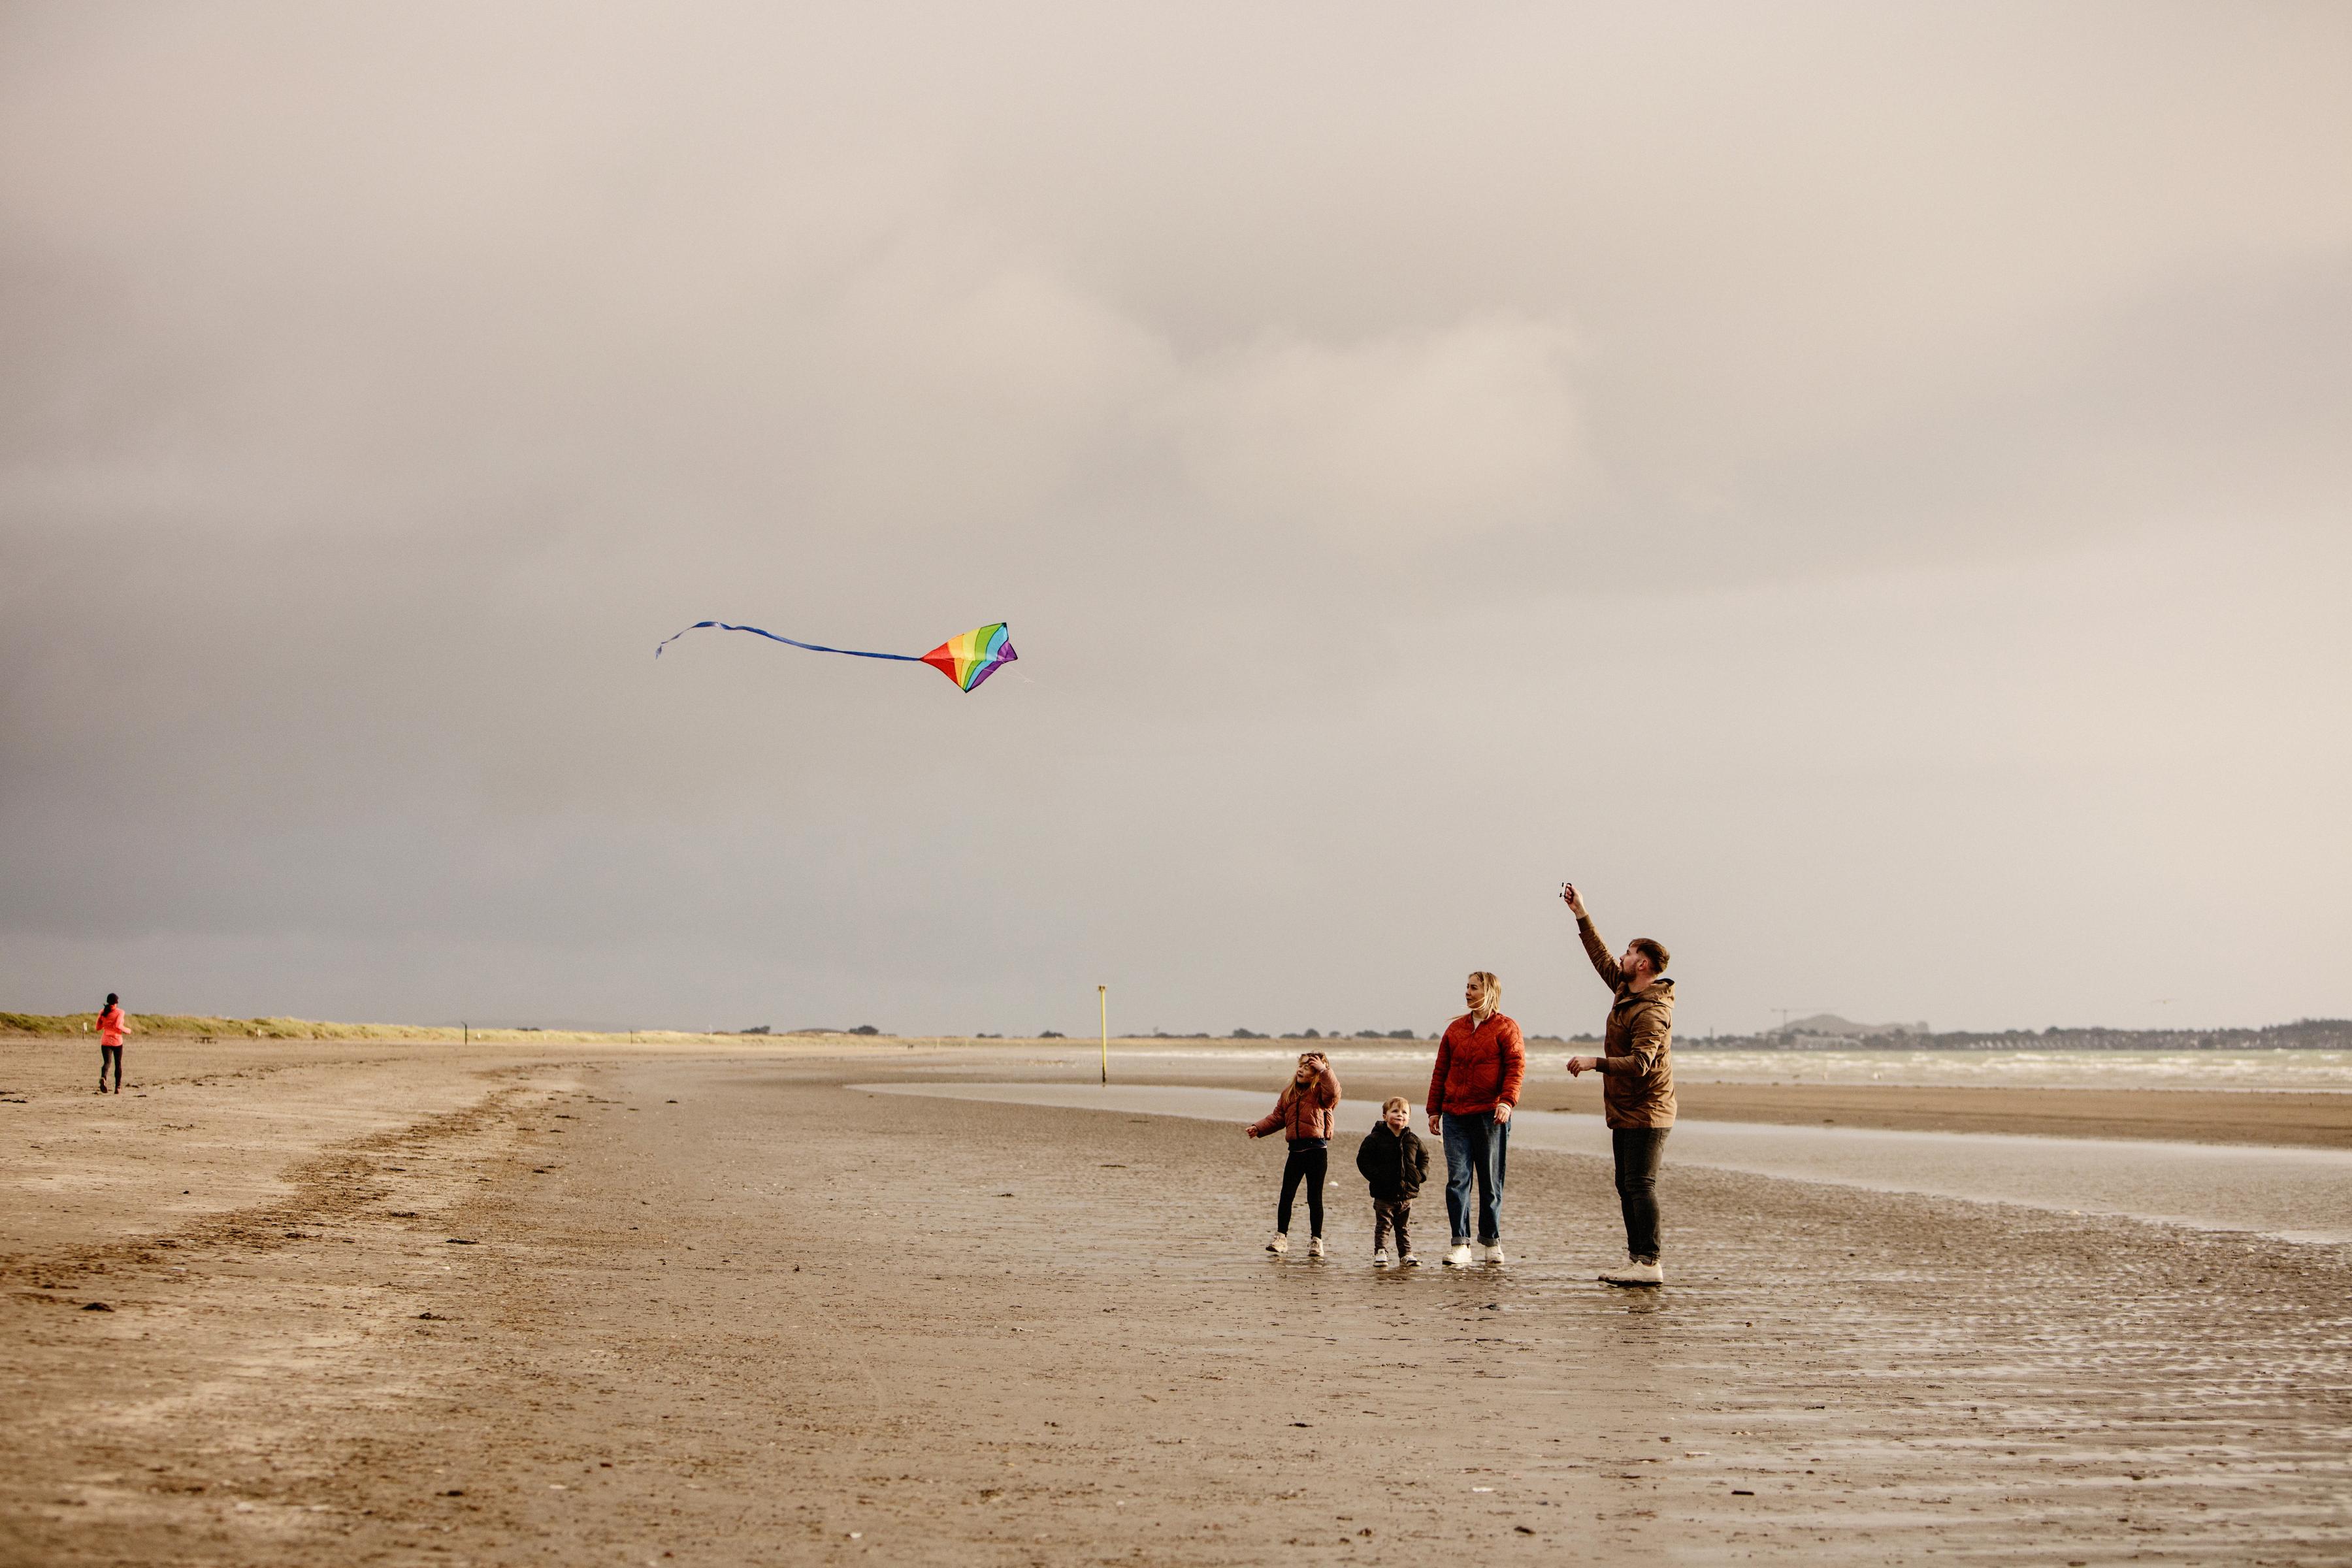 Image of a family flying a kite